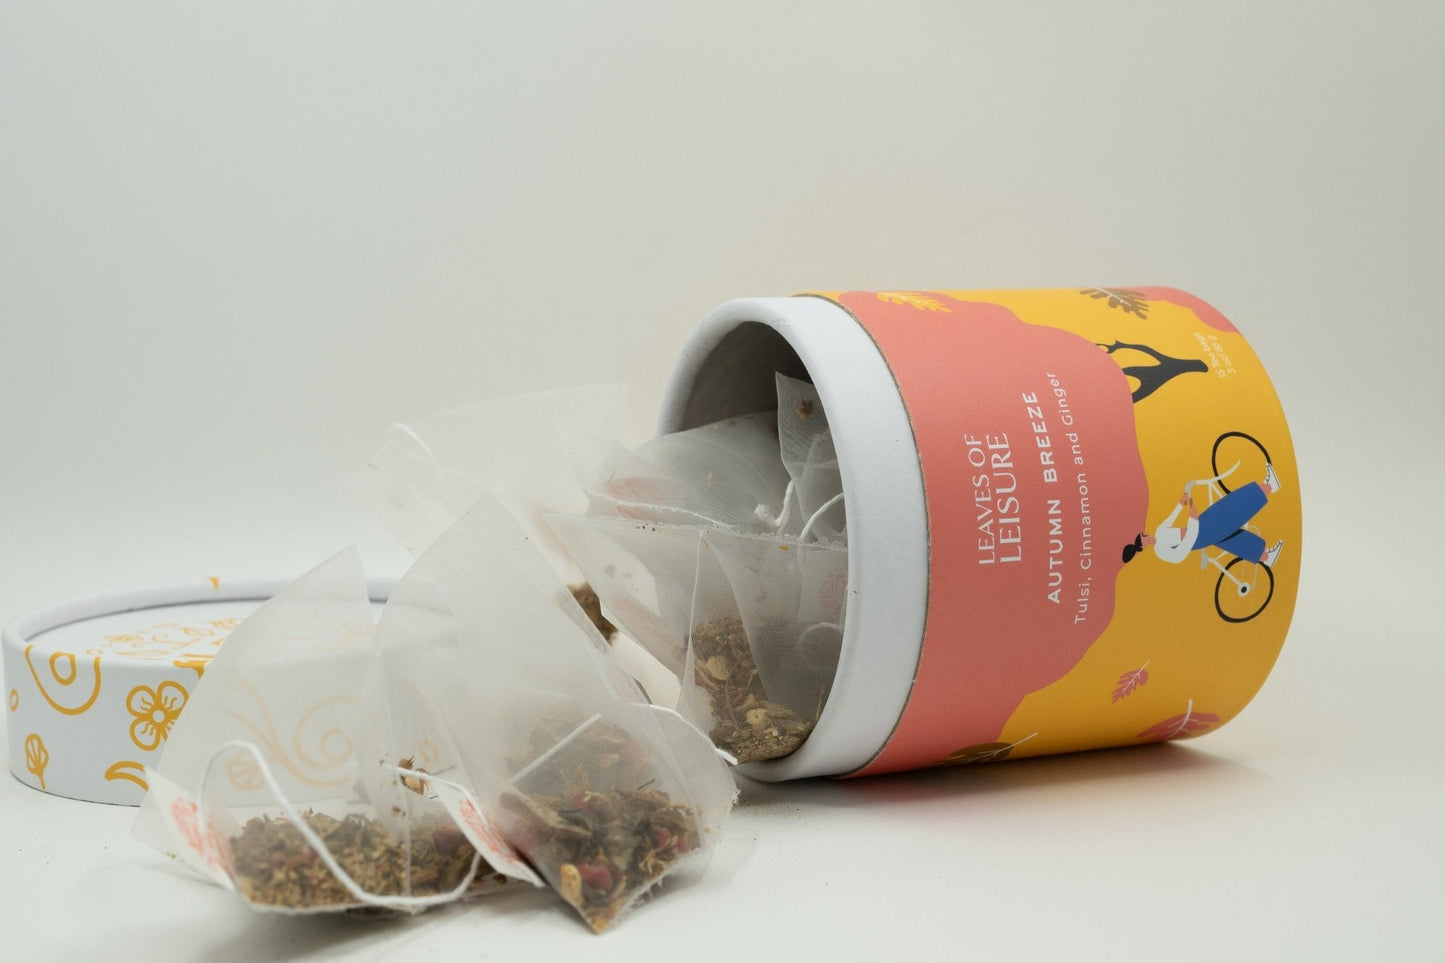 Autumn Breeze Herbal Tea by Leaves of Leisure